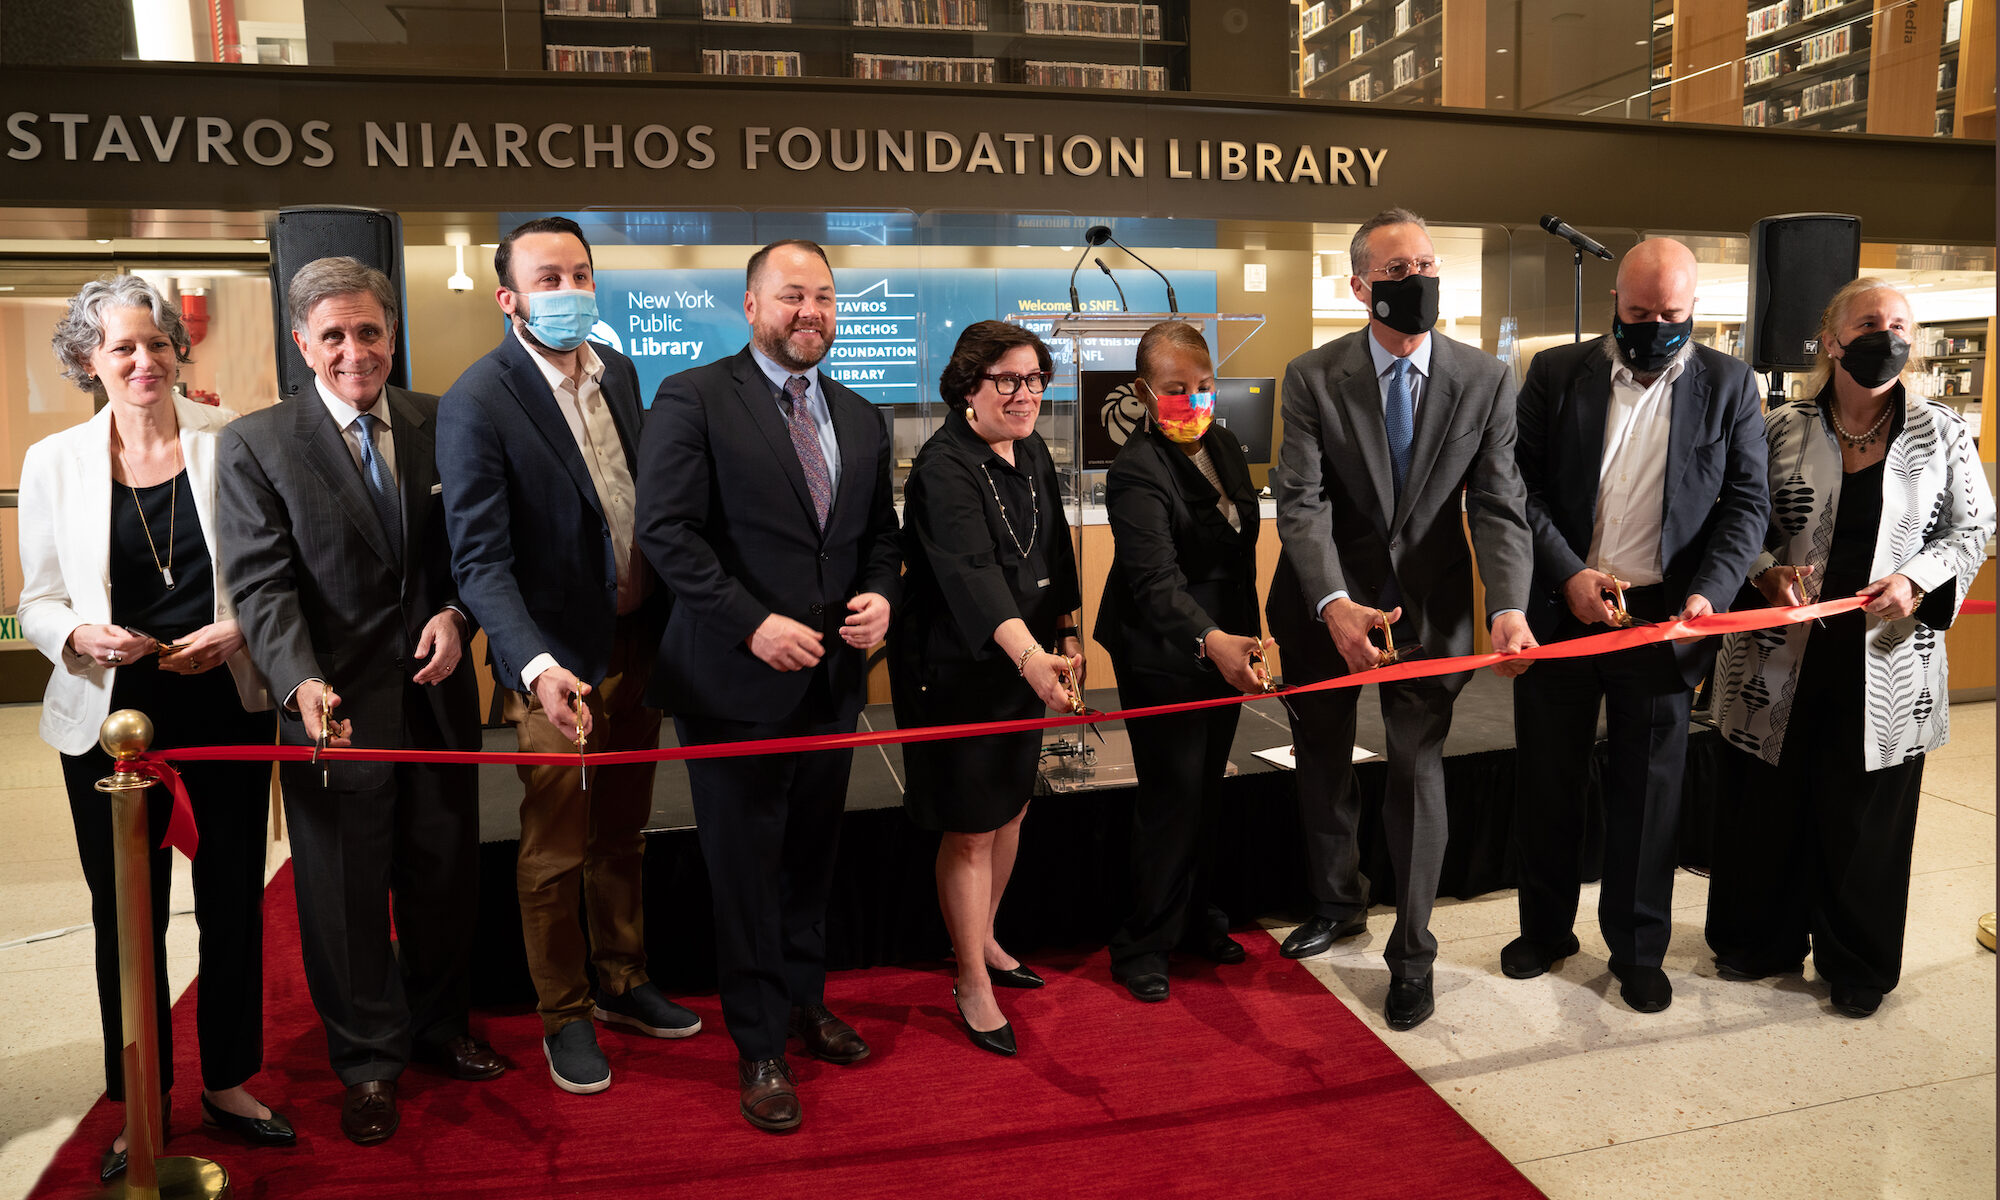 Photo from the ribbon-cutting ceremony at the Stavros Niarchos Foundation Library (SNFL) grand opening